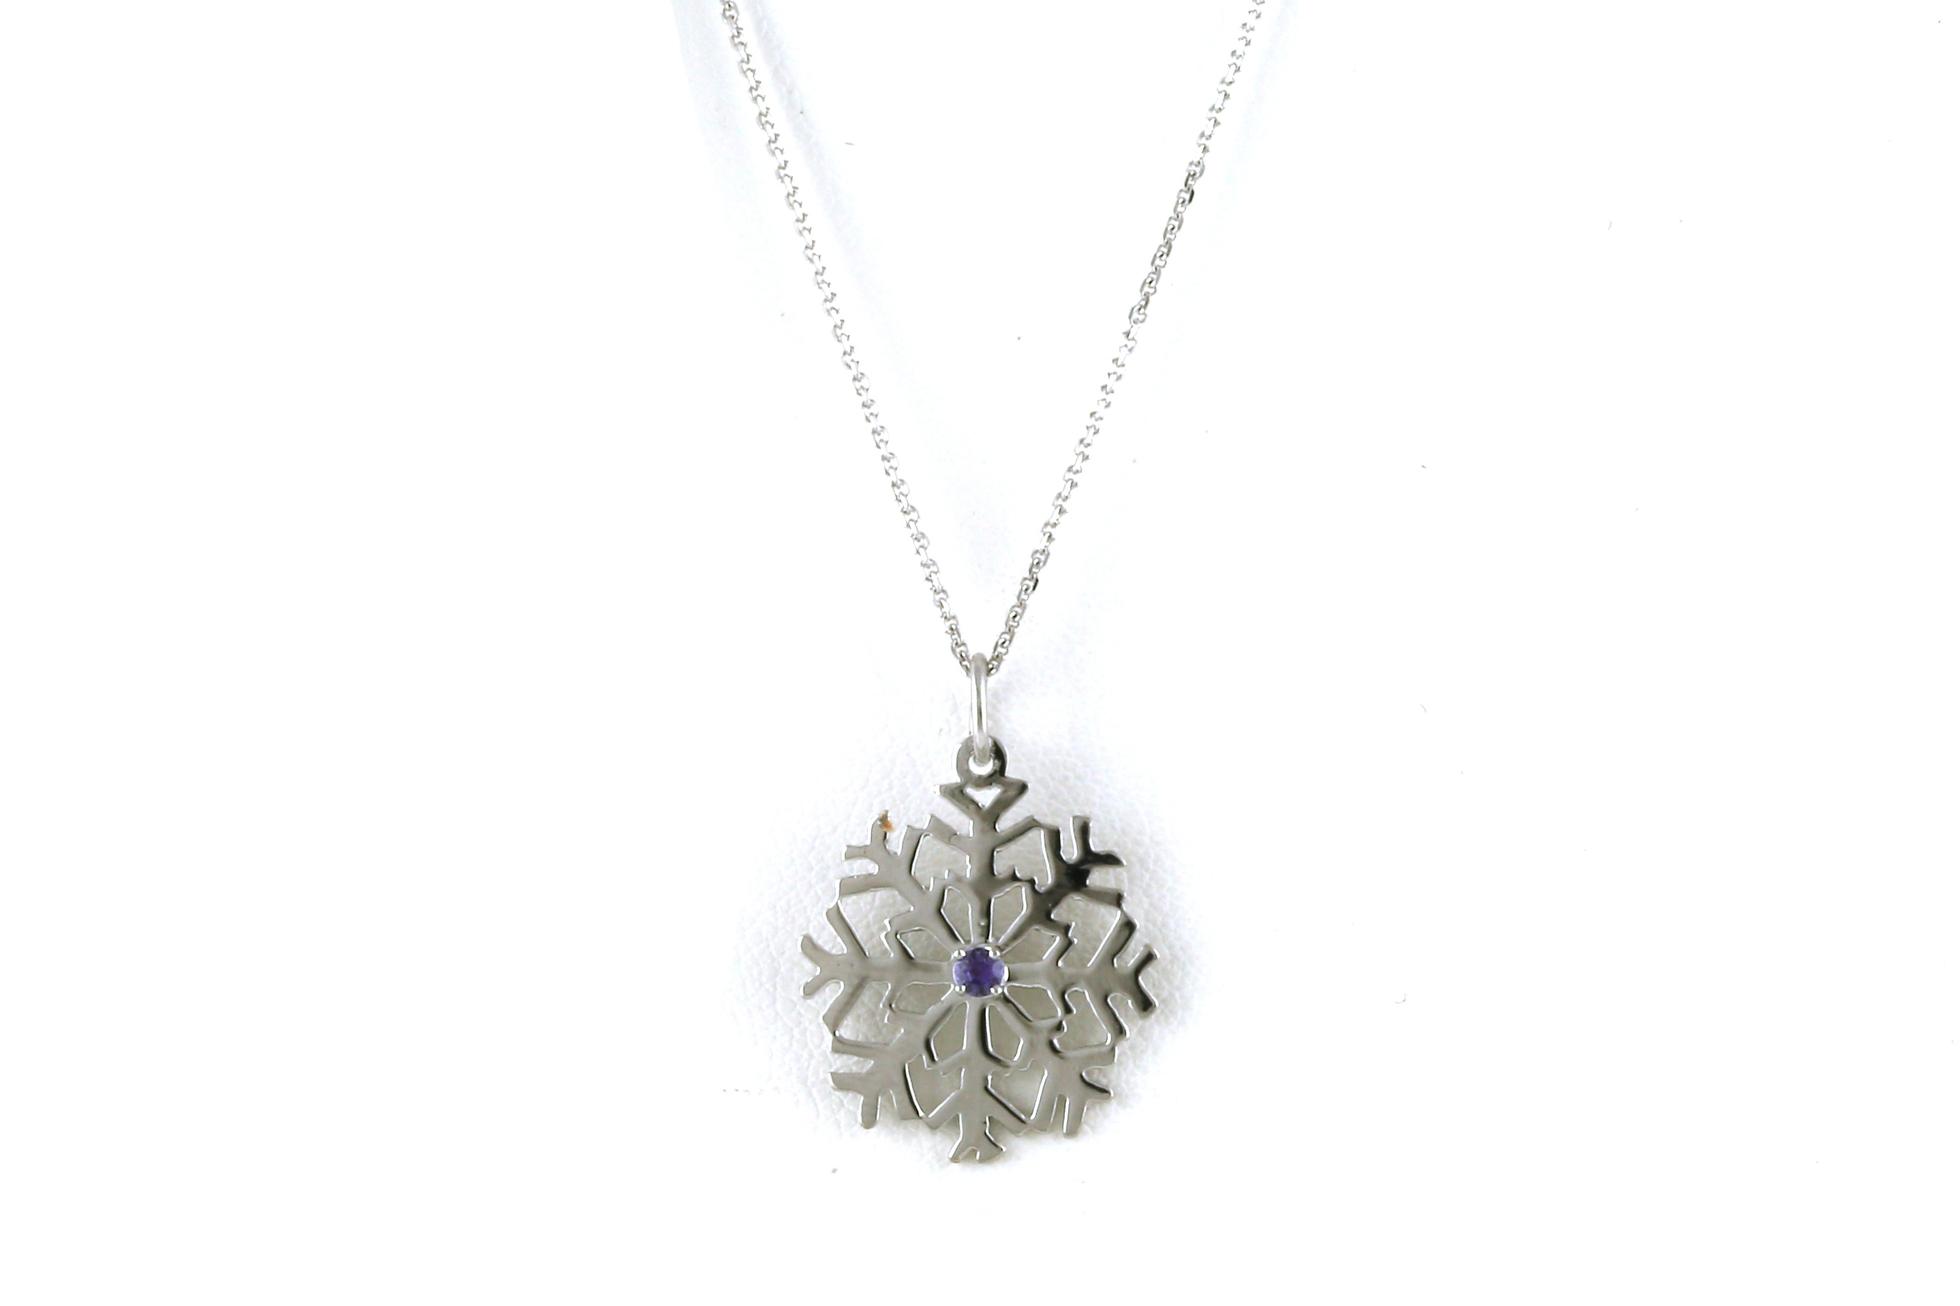 Snowflake Huckleberry Montana Yogo Sapphire Necklace in Sterling Silver (0.05cts TWT)